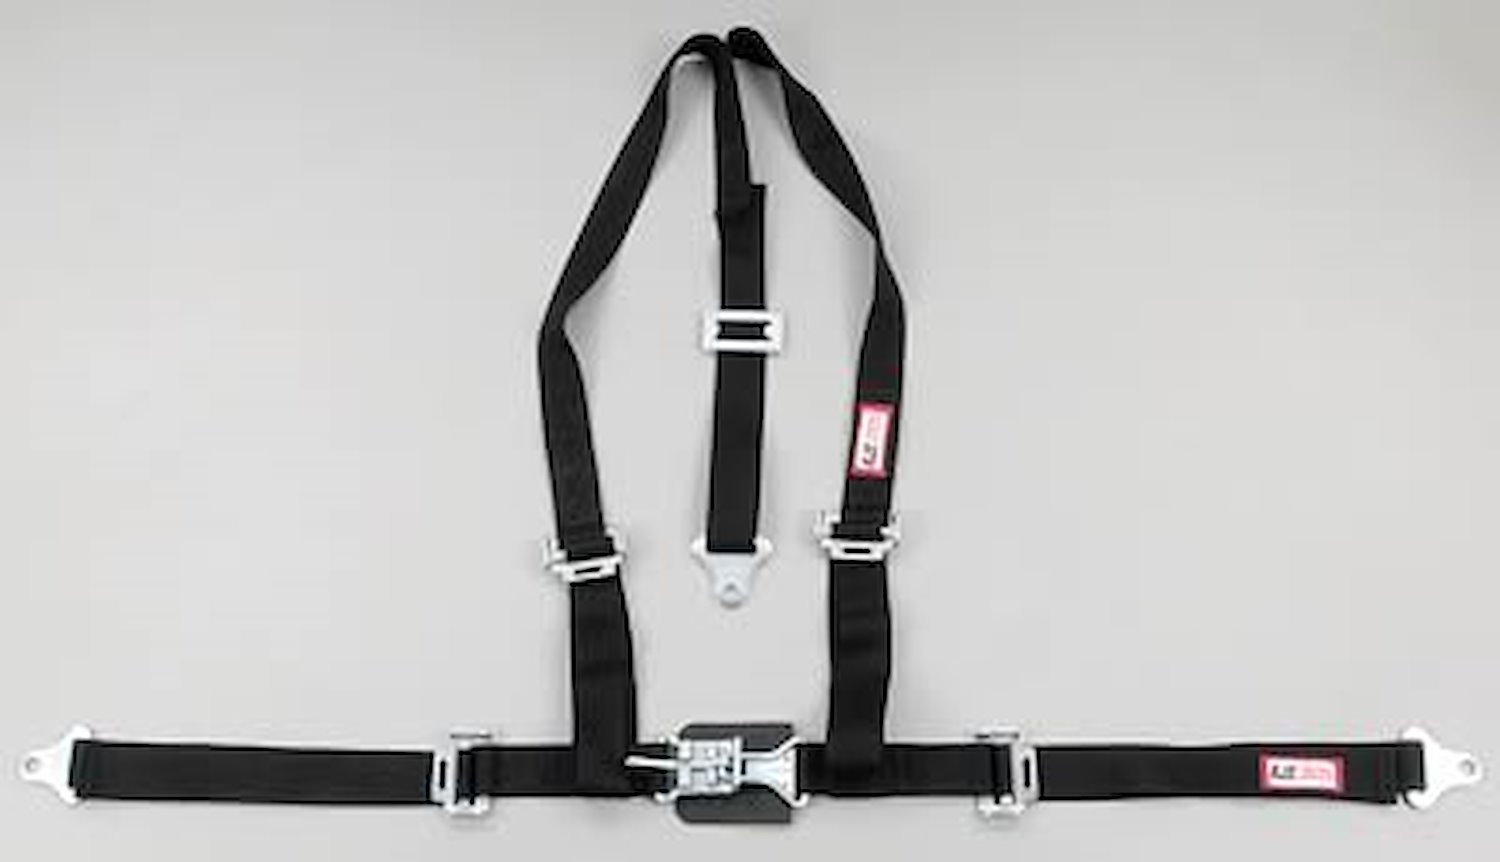 NON-SFI L&L HARNESS 2 PULL DOWN Lap Belt SEWN IN 2 S.H. V ROLL BAR Mount ALL SNAP ENDS BLUE